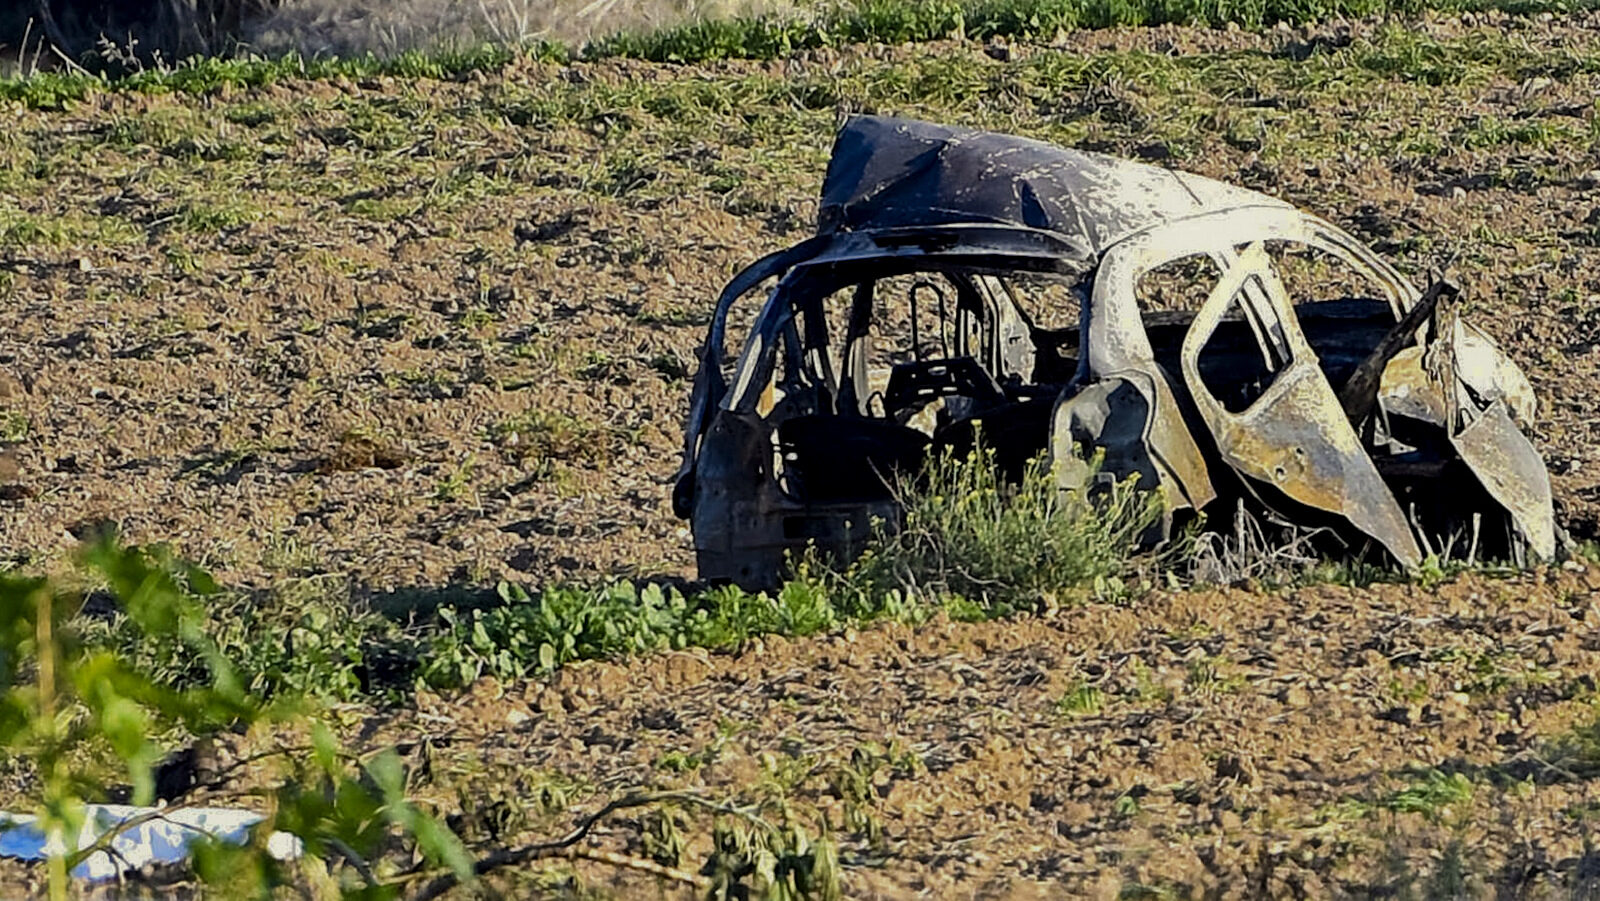 The wreckage of the car of investigative journalist Daphne Caruana Galizia lies next to a road in the town of Mosta, Malta, Monday, Oct. 16, 2017. Malta's prime minister says a car bomb has killed an investigative journalist on the island nation. Prime Minister Joseph Muscat said the bomb that killed reporter Daphne Caruana Galizia exploded Monday afternoon as she left her home in a town outside Malta's capital, Valetta. (AP/Rene Rossignaud)